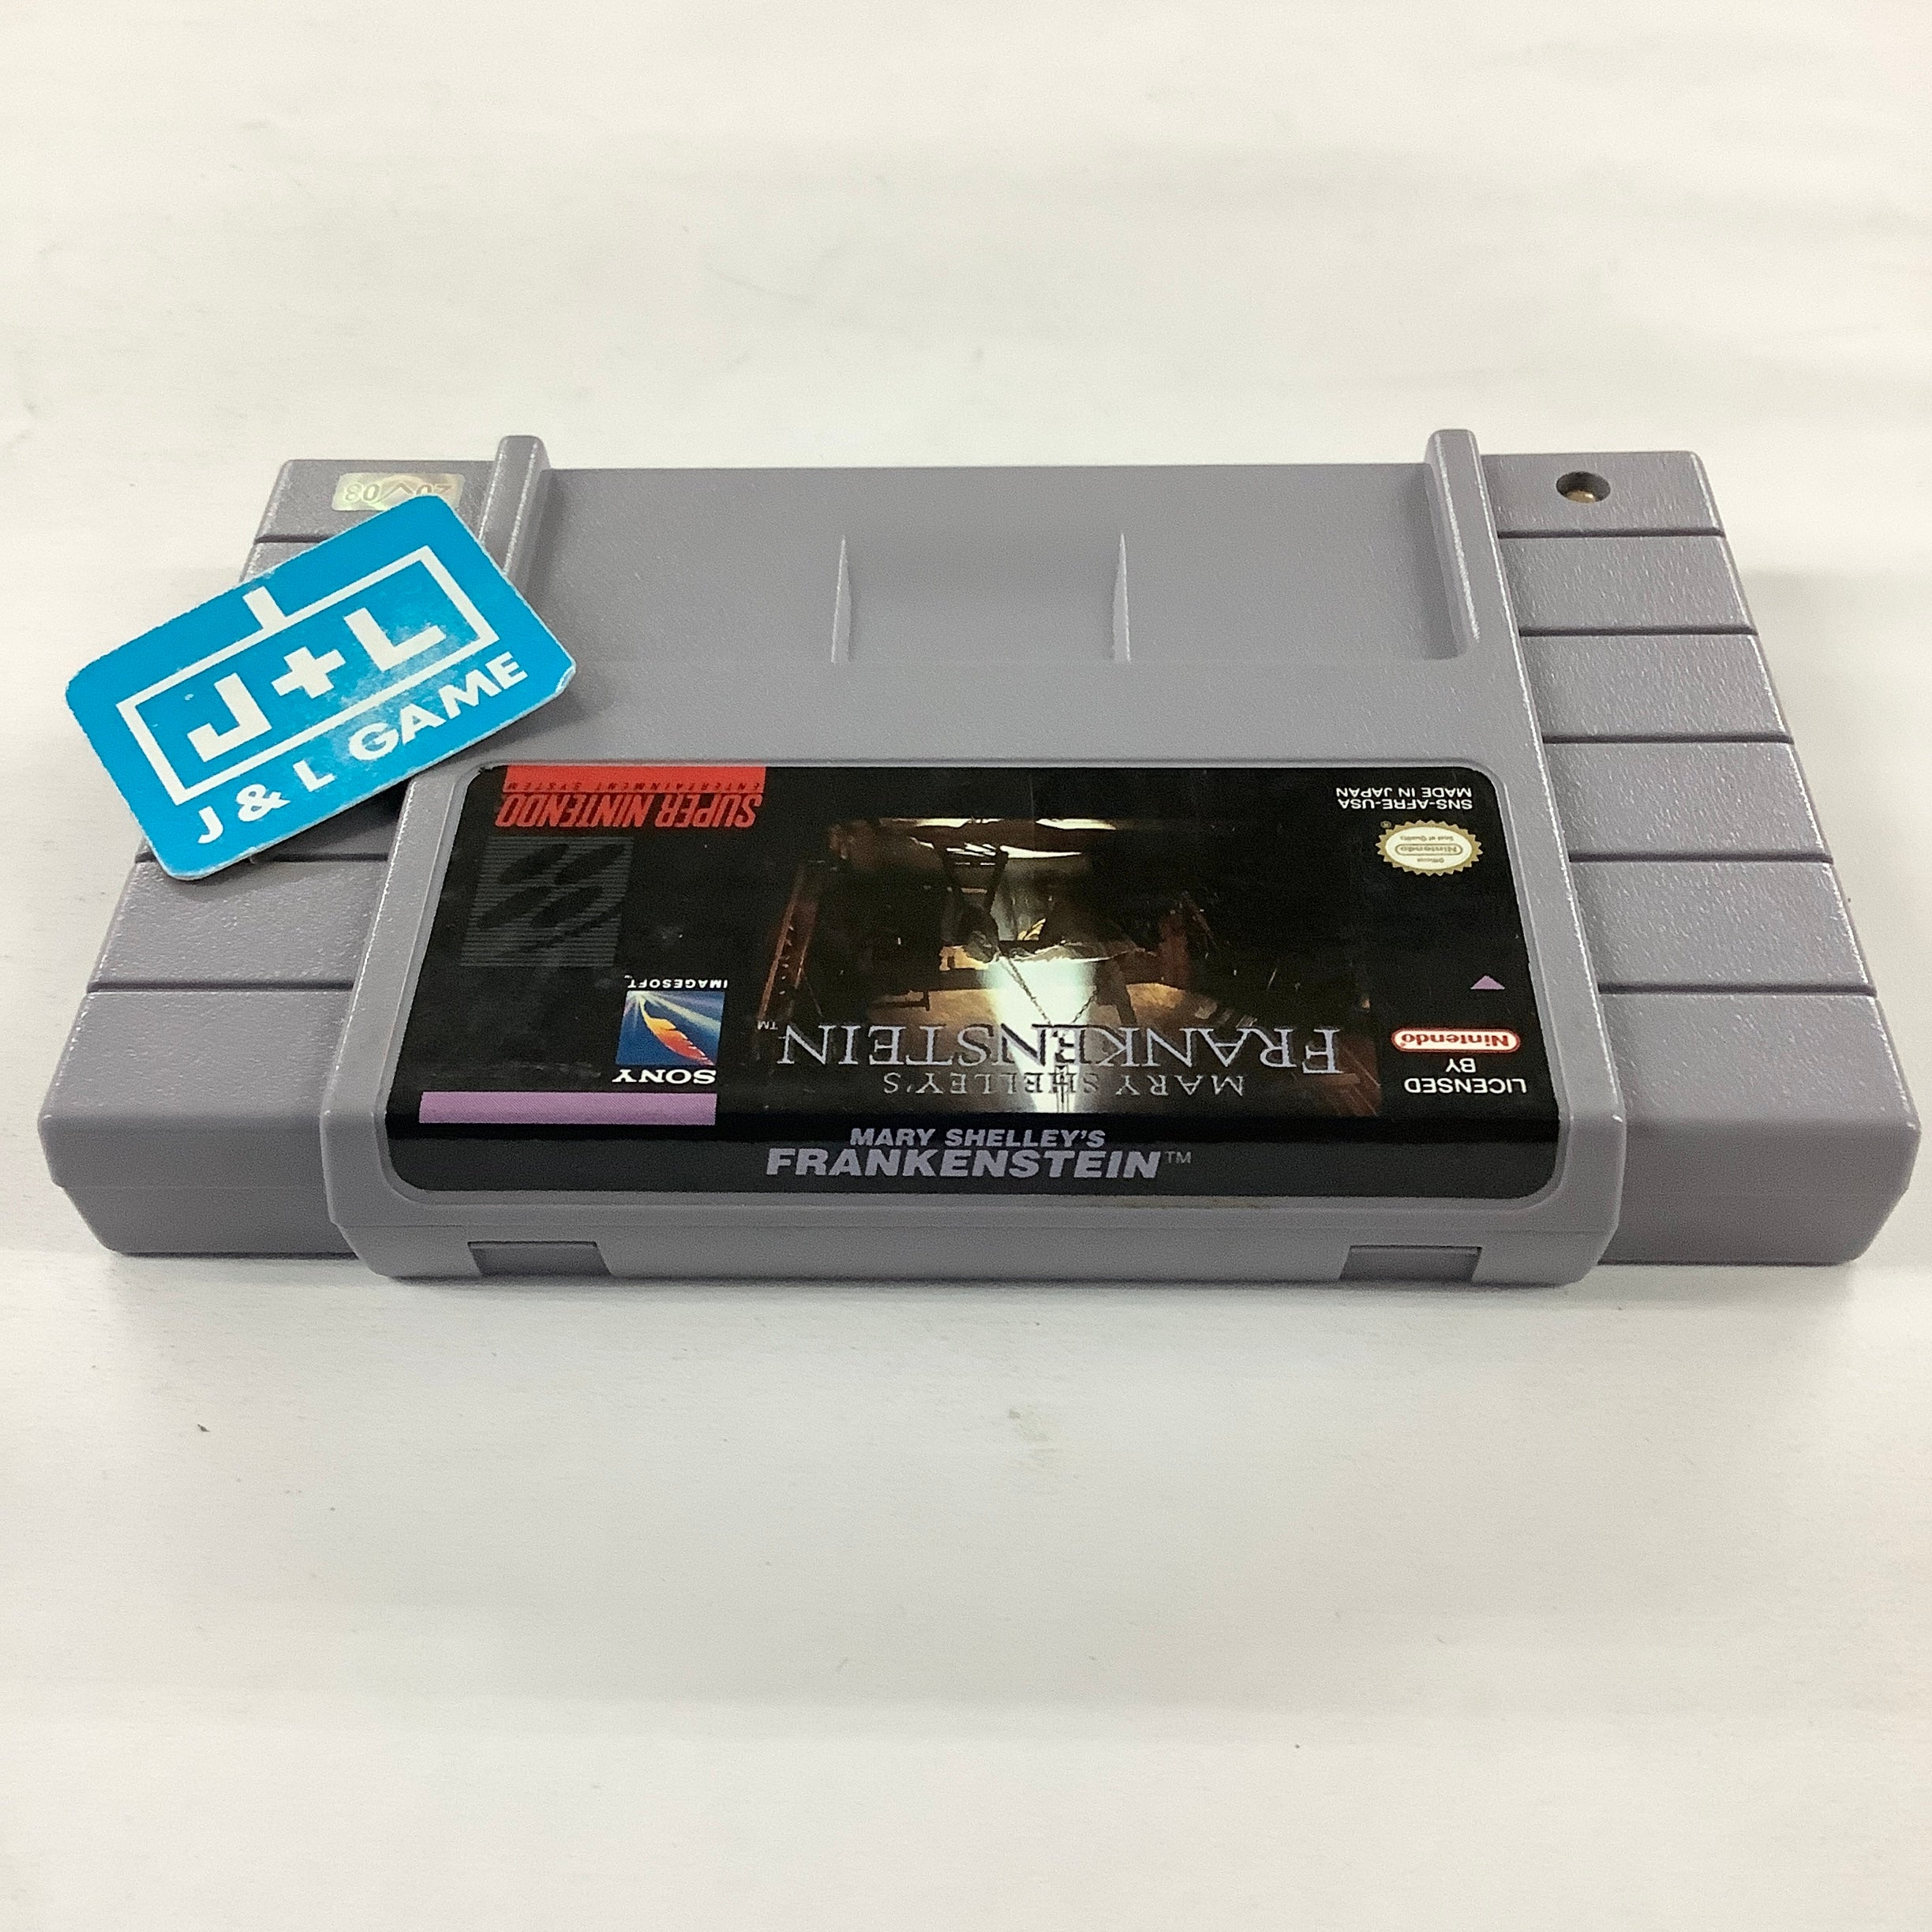 Mary Shelley's Frankenstein - (SNES) Super Nintendo [Pre-Owned] Video Games Sony Imagesoft   